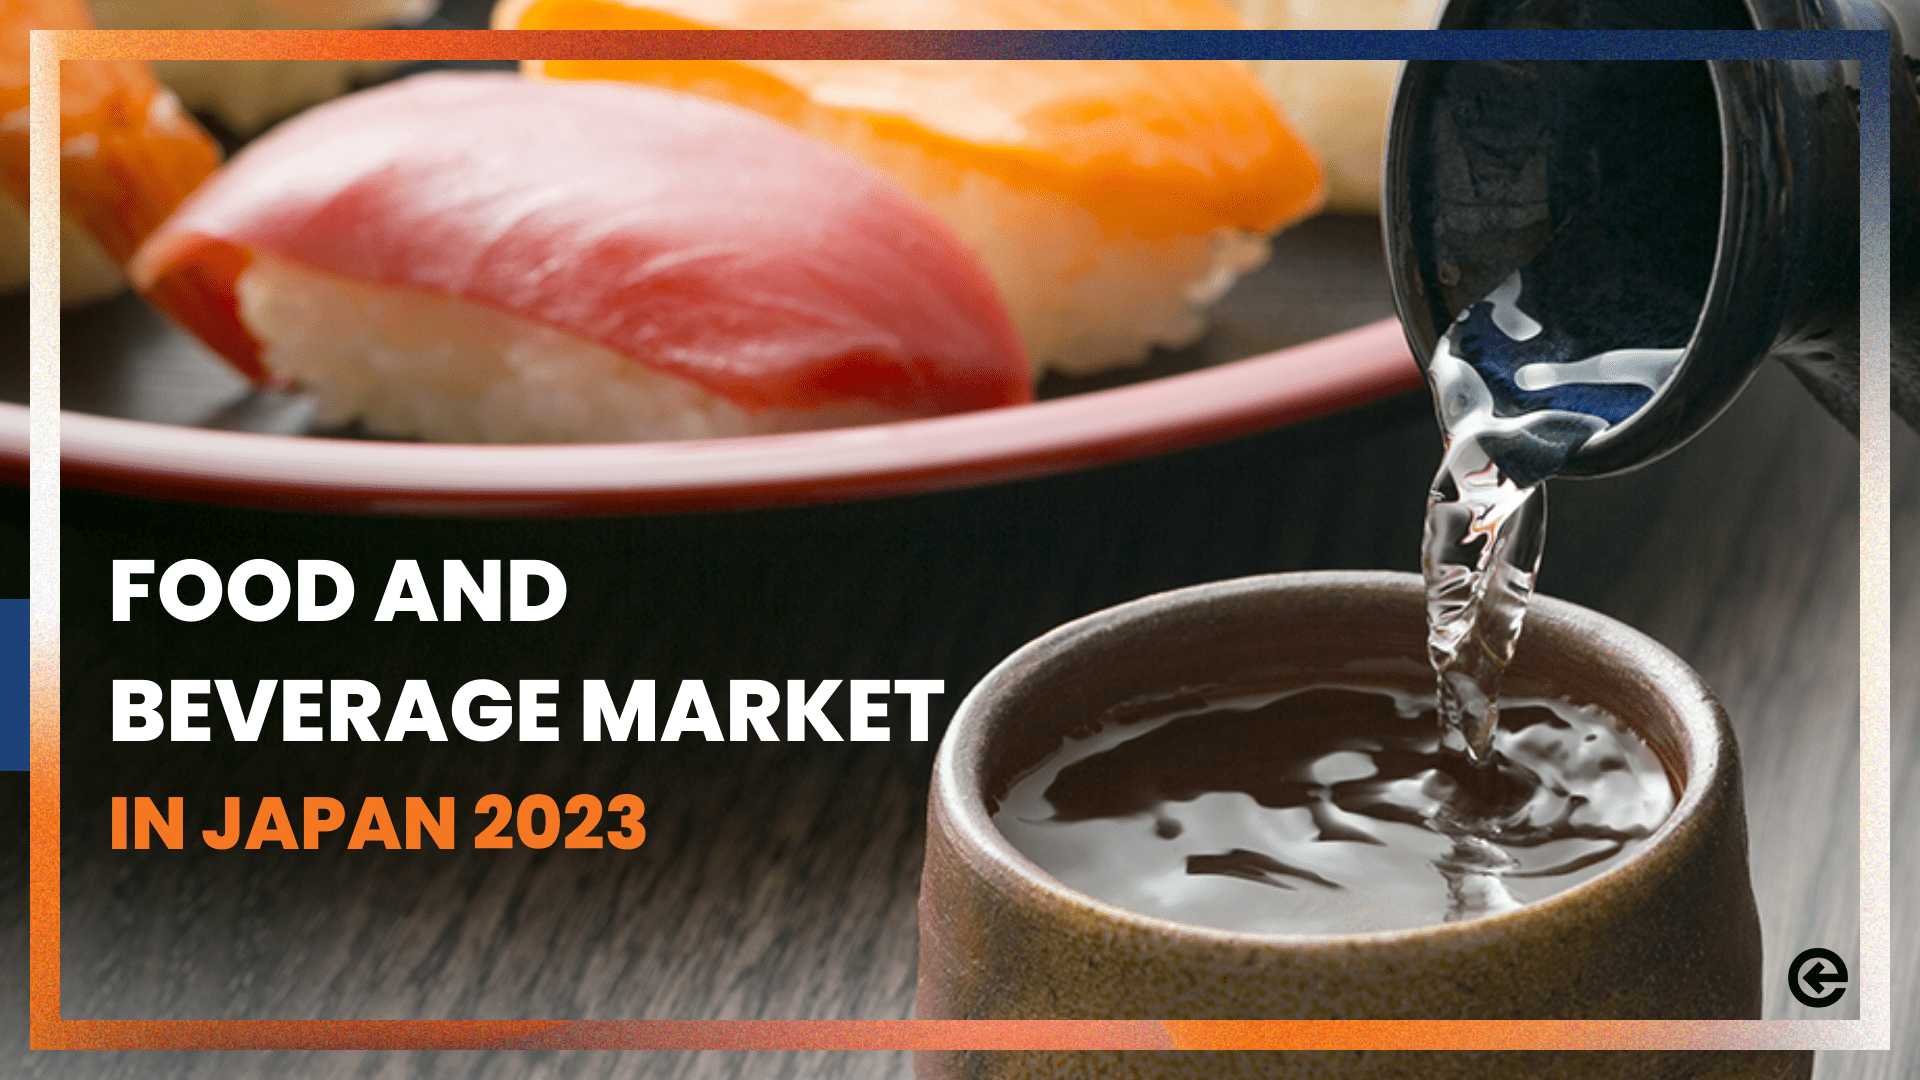 What Trends Does Japan’s Food and Beverage Market Hold in 2023?